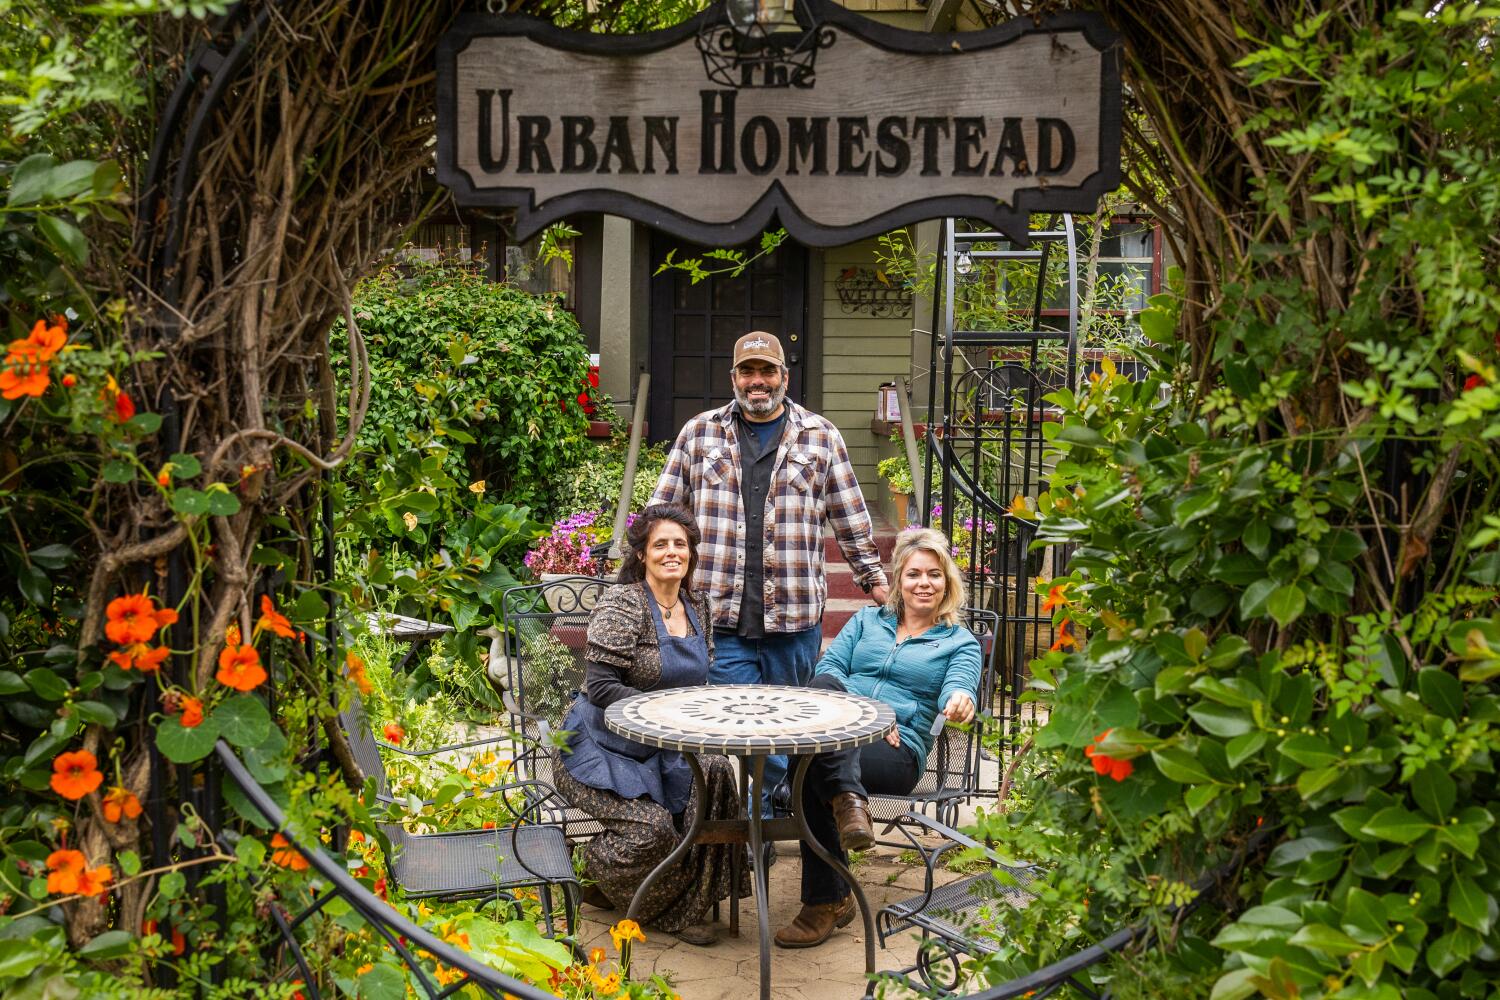 Seeking a simpler life, he built an urban homestead. Now his family keeps it growing